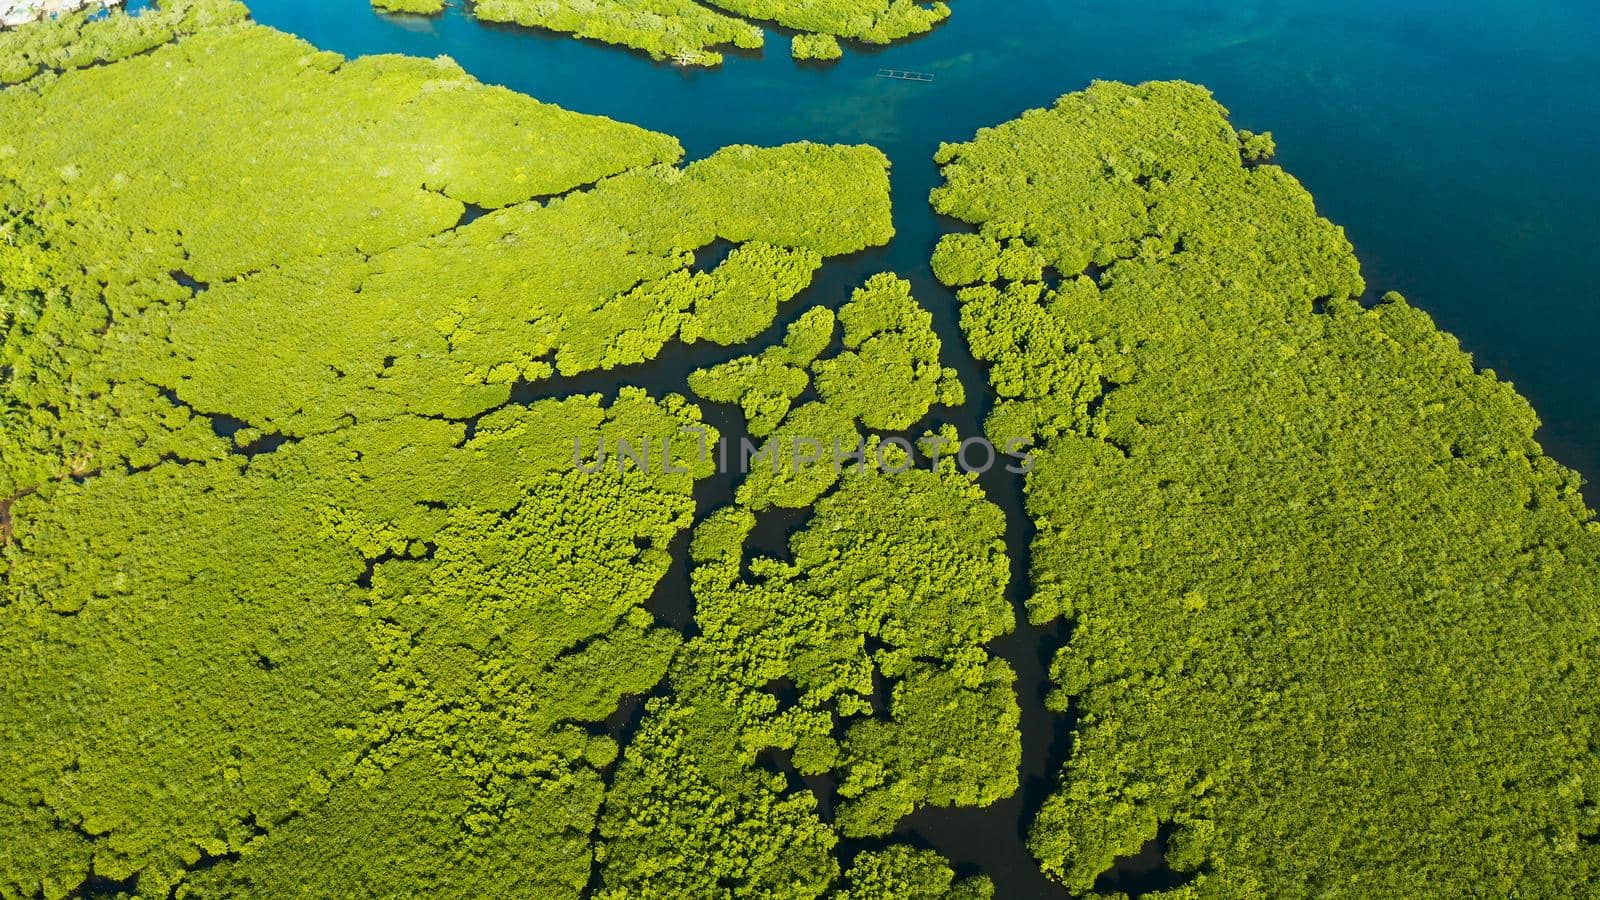 Aerial view of Mangrove forest and river. by Alexpunker